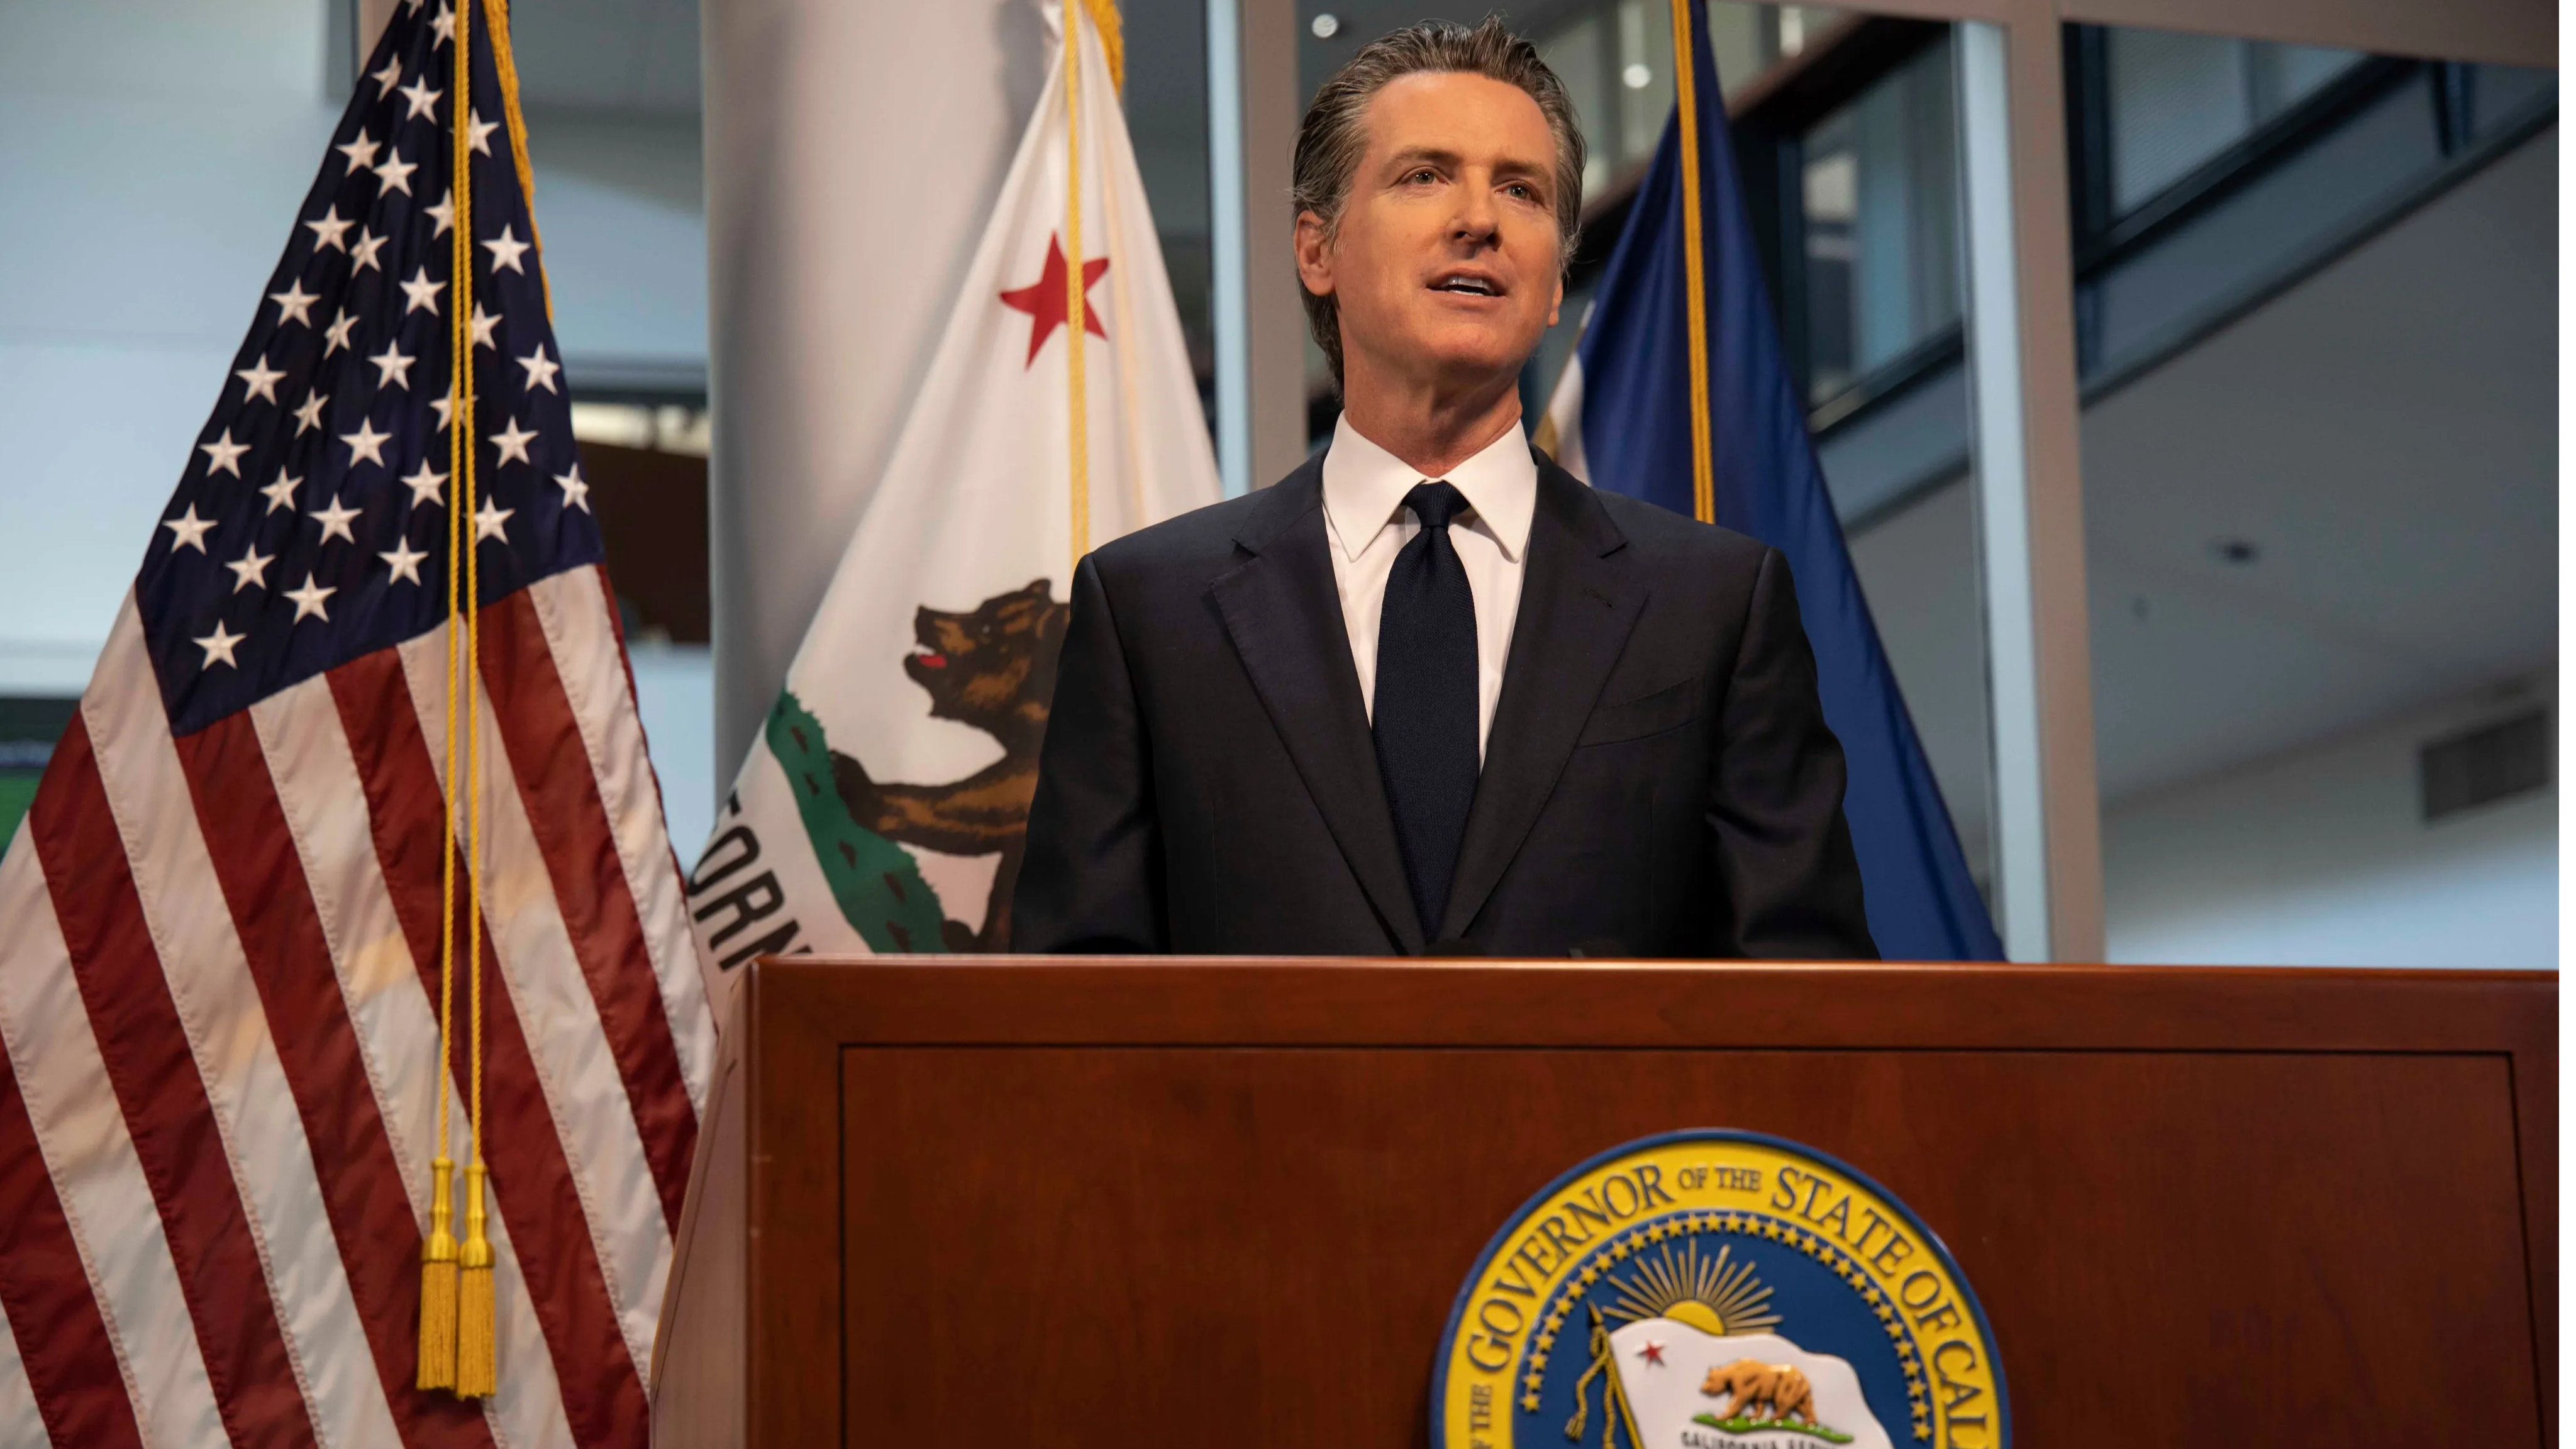 5 takeaways from California Governor Gavin Newsom’s victory